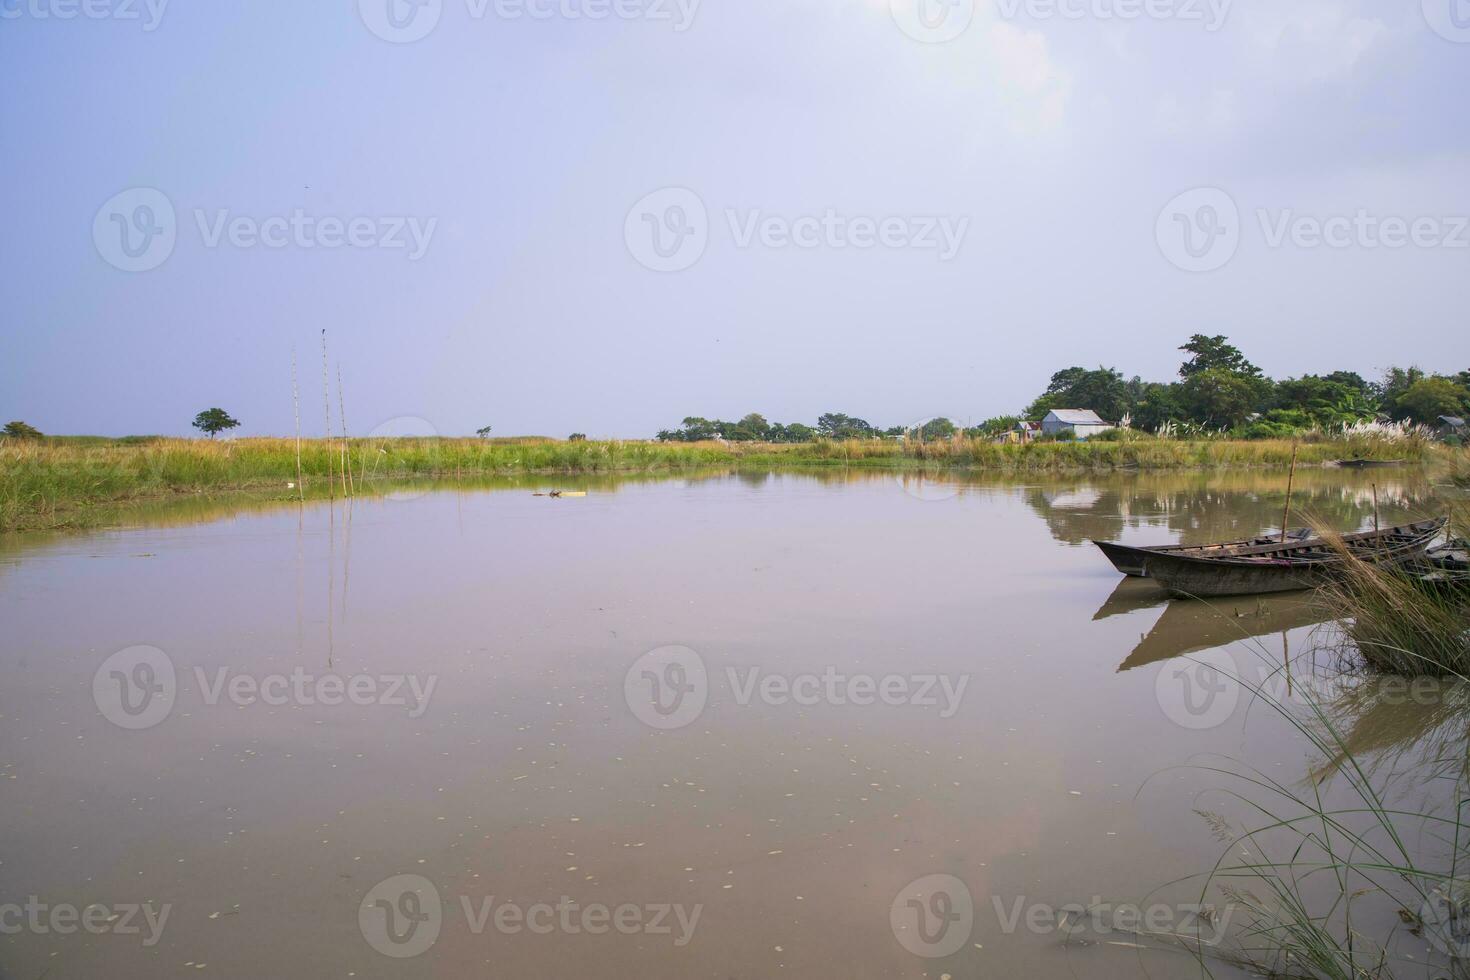 Canal with green grass and vegetation reflected in the water near Padma River in Bangladesh photo